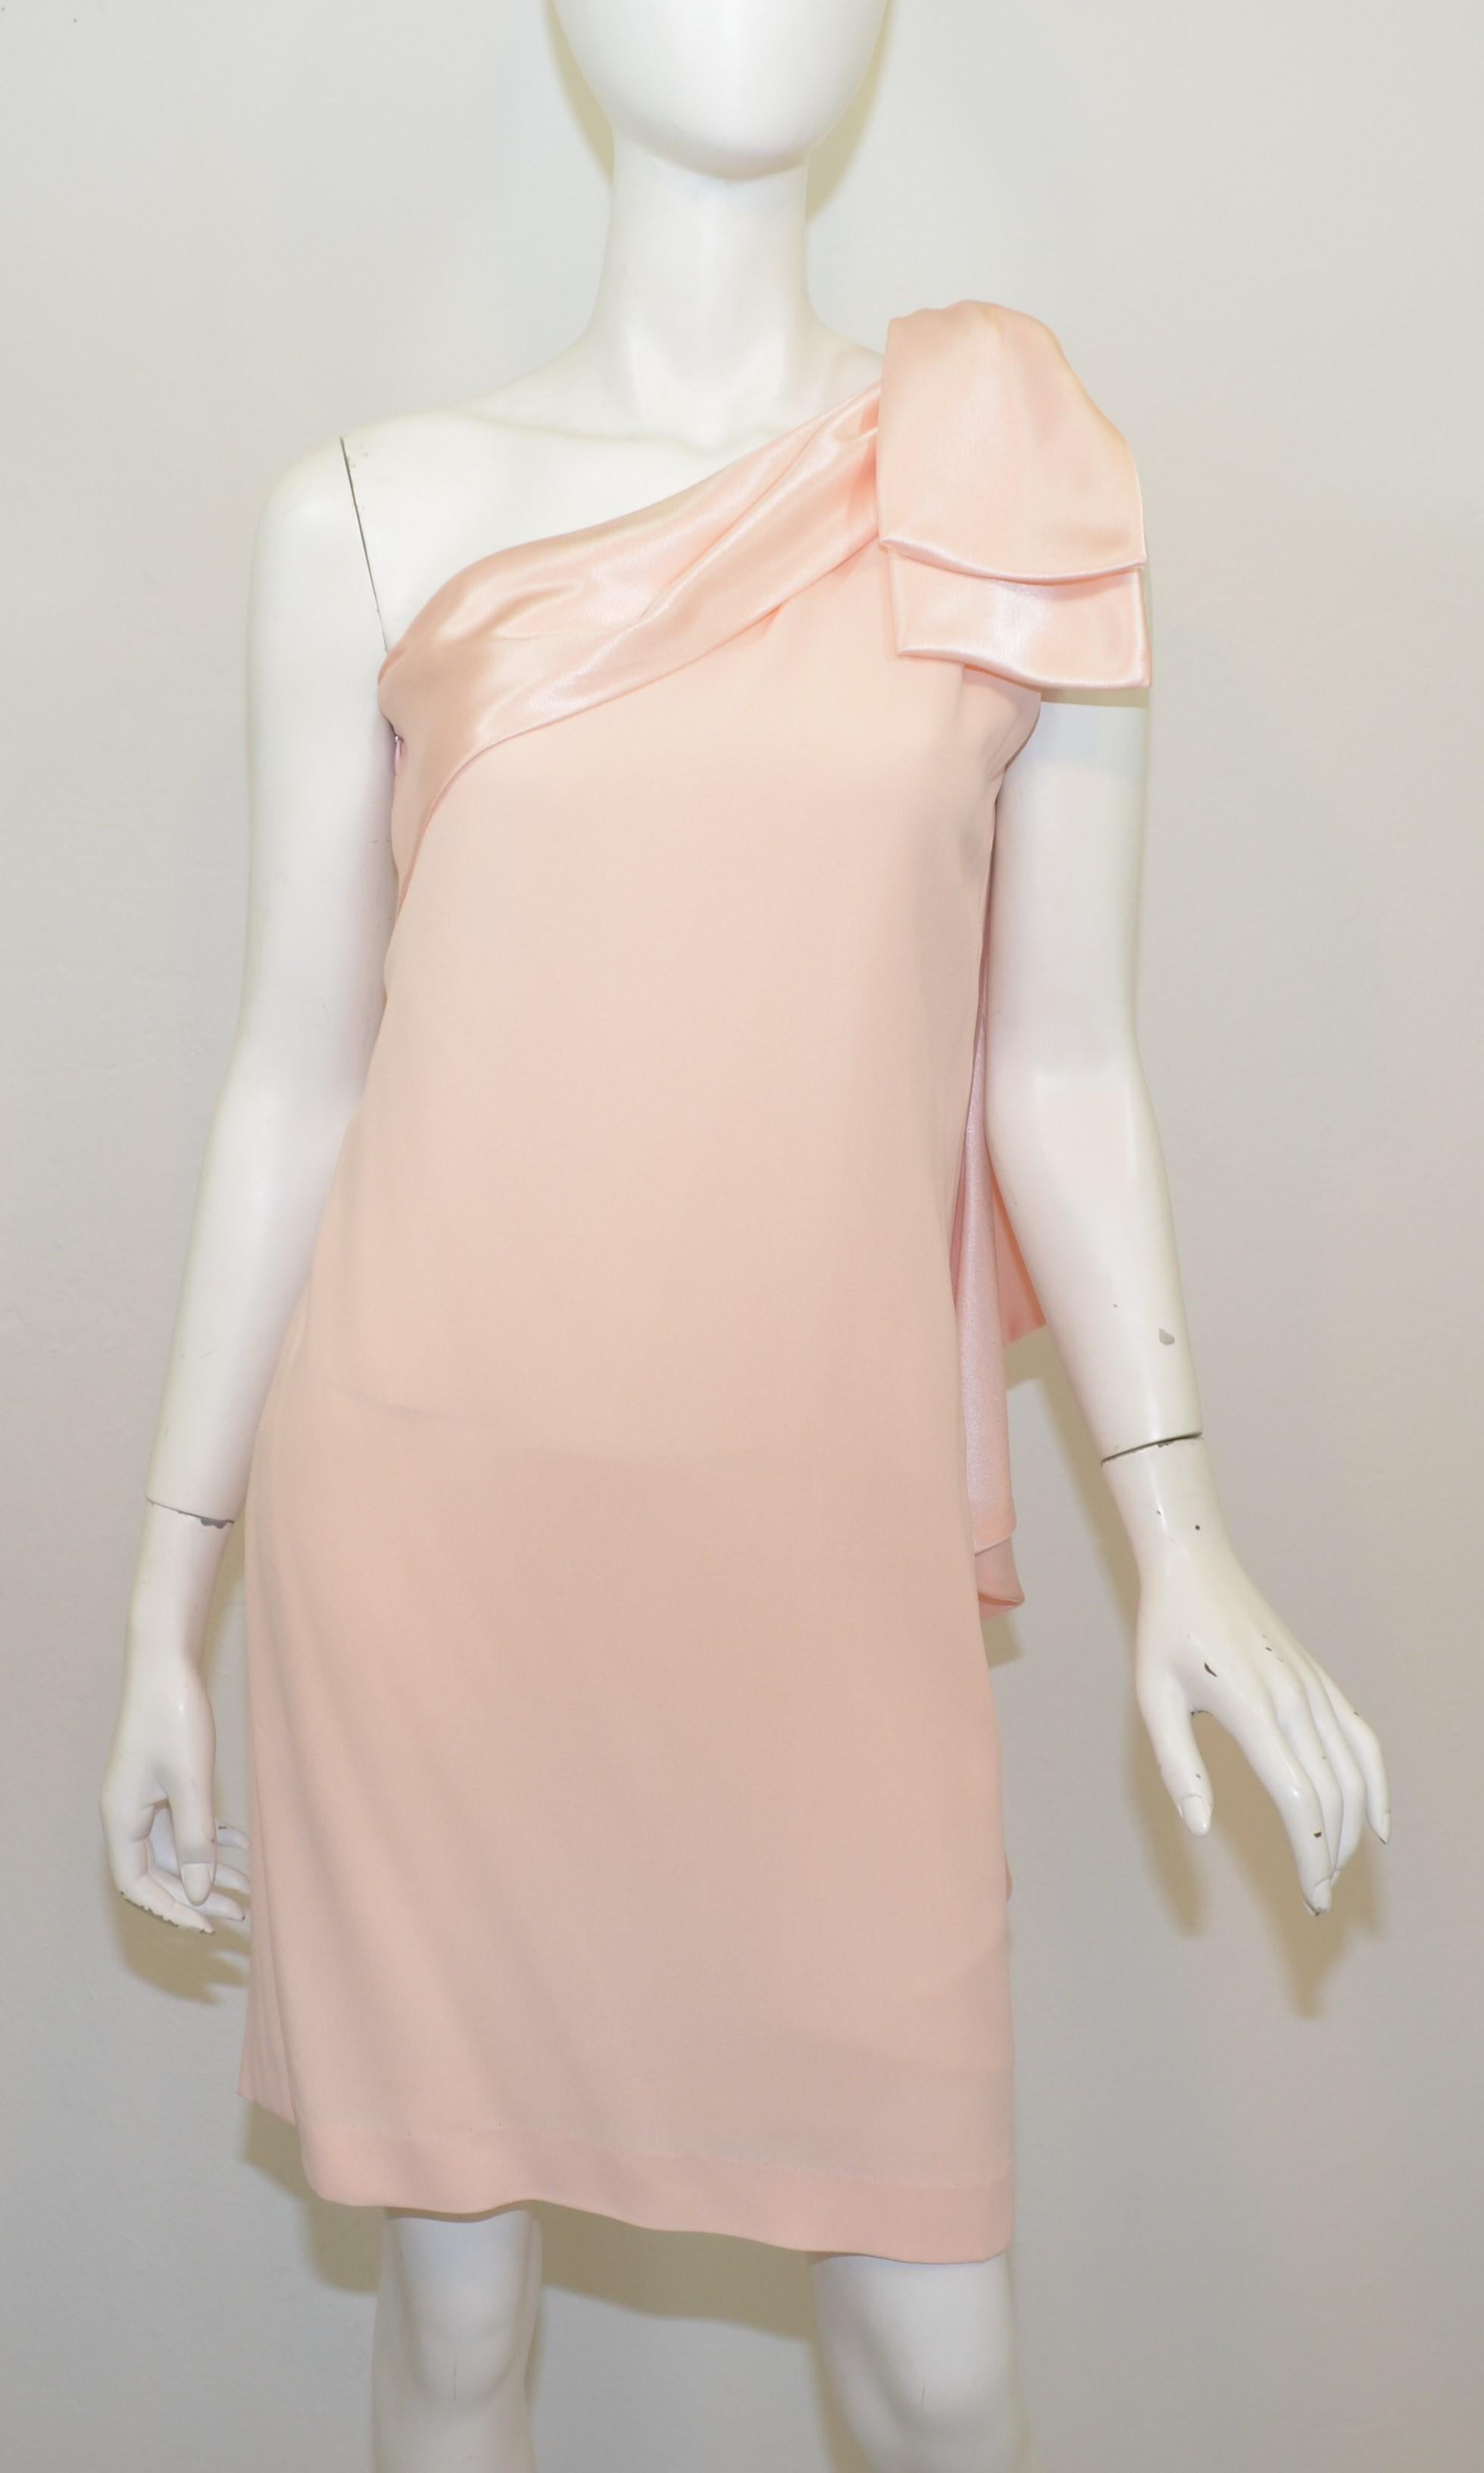 Vintage Bill Blass Pink One-Shoulder Dress -- dress features a large bow that lies on the left shoulder, and a side zipper fastening. Dress is in wonderful vintage condition with no flaws to mention. Labeled size 8.

Measurements:
Bust 36”, waist